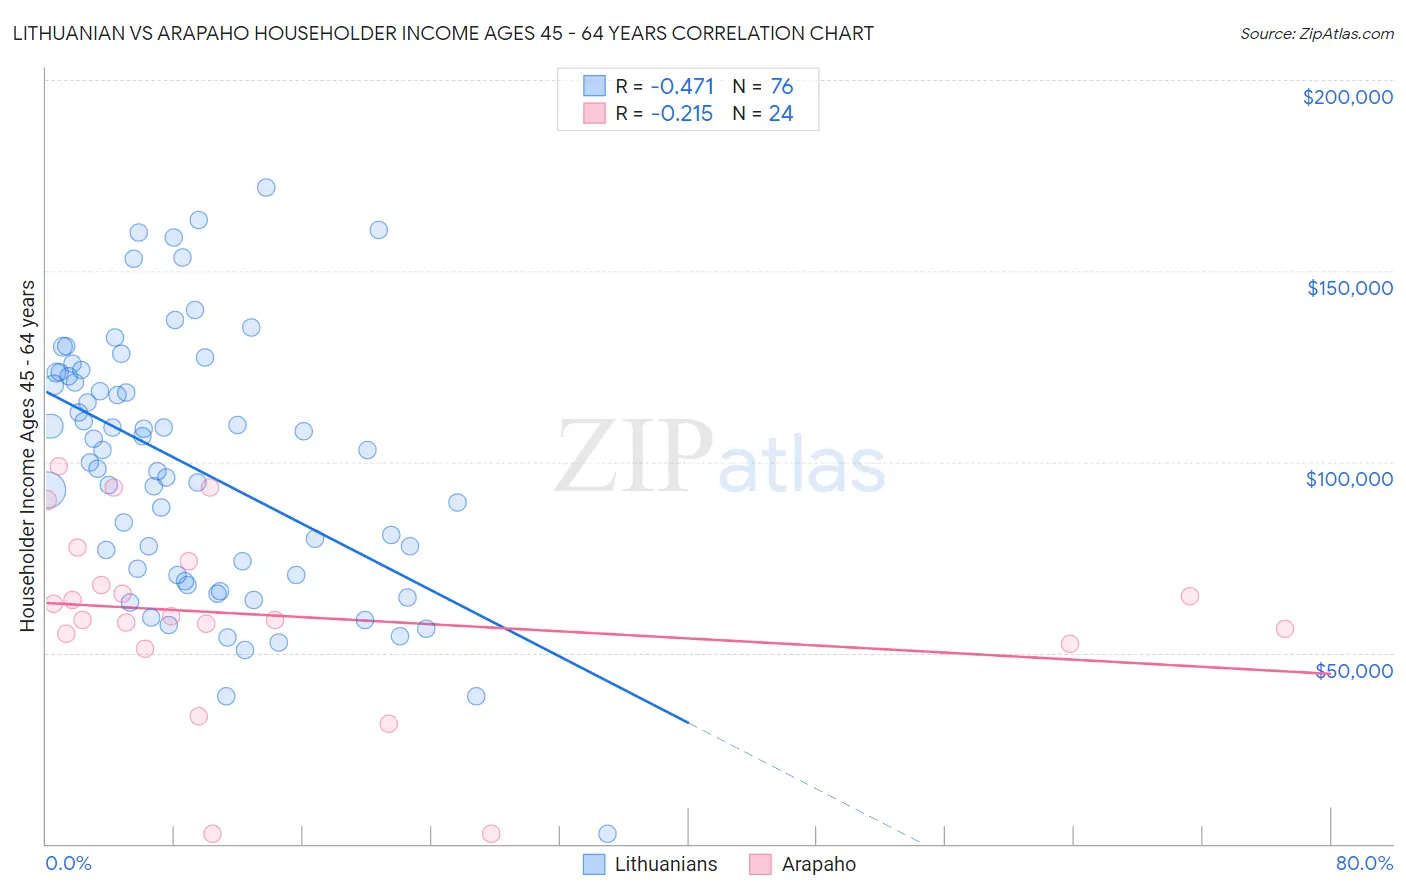 Lithuanian vs Arapaho Householder Income Ages 45 - 64 years